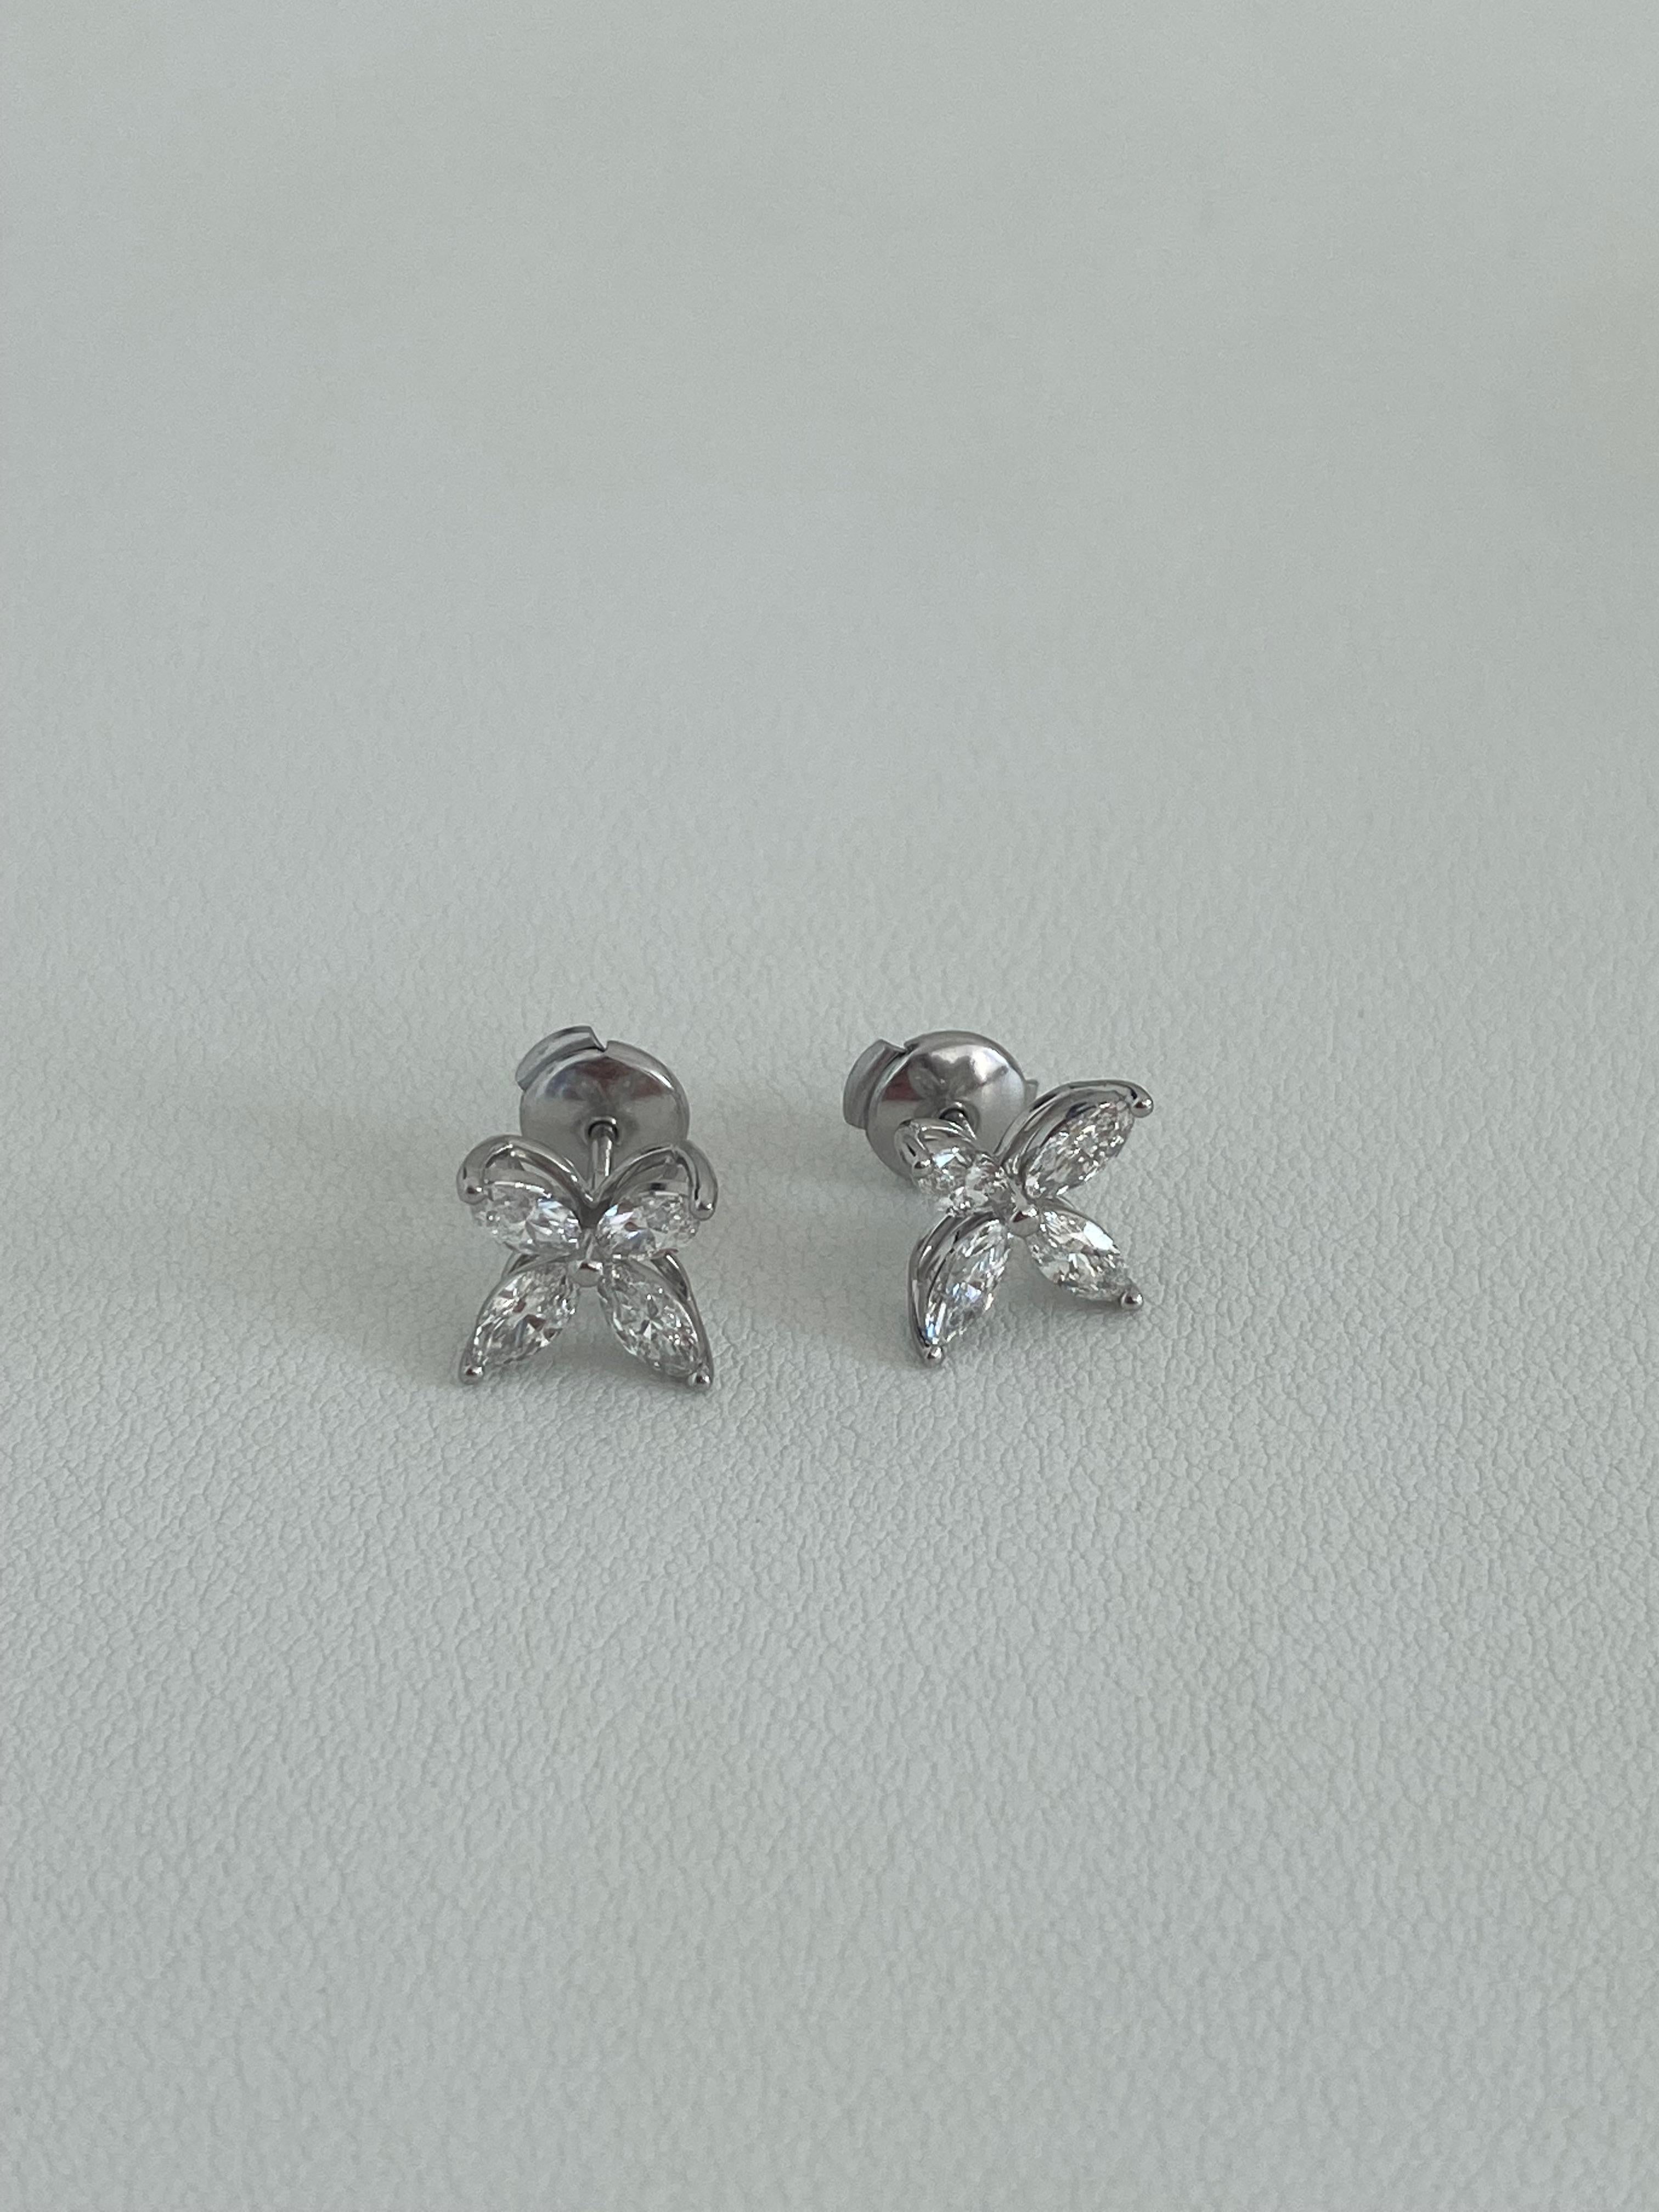 Tiffany Co Victoria medium size earrings 
Retail value : $13,000
Carat weight 0.92 ct
Platinum 
Come within the original packaging 
No visible signs of wear, no modifications, recently polished by a professional 
